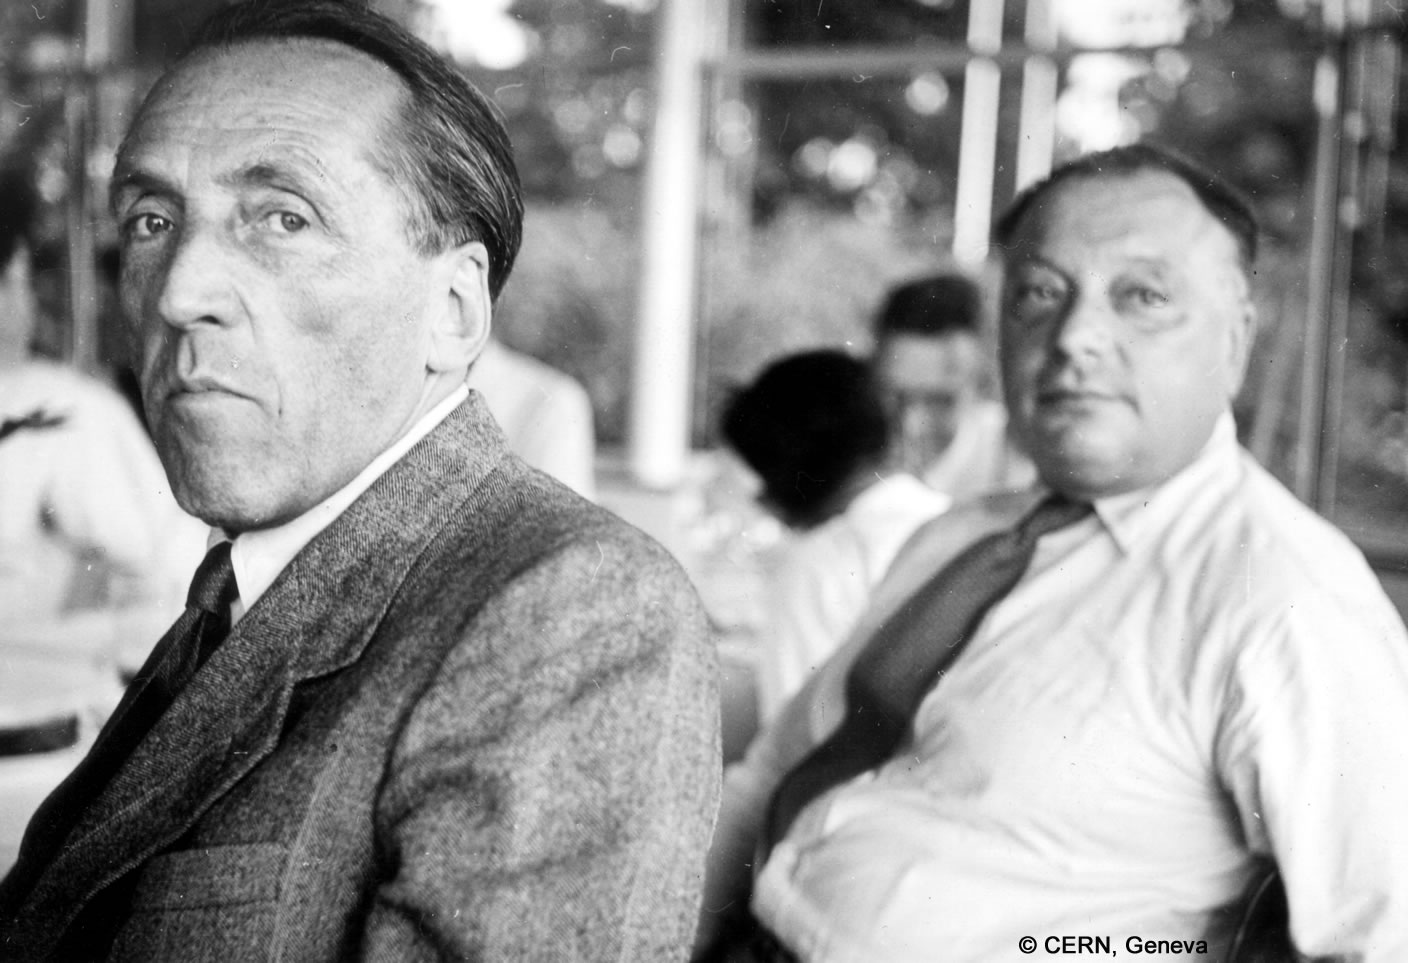 Paul Scherrer sits next to Wolfgang Pauli, both looking in the same direction